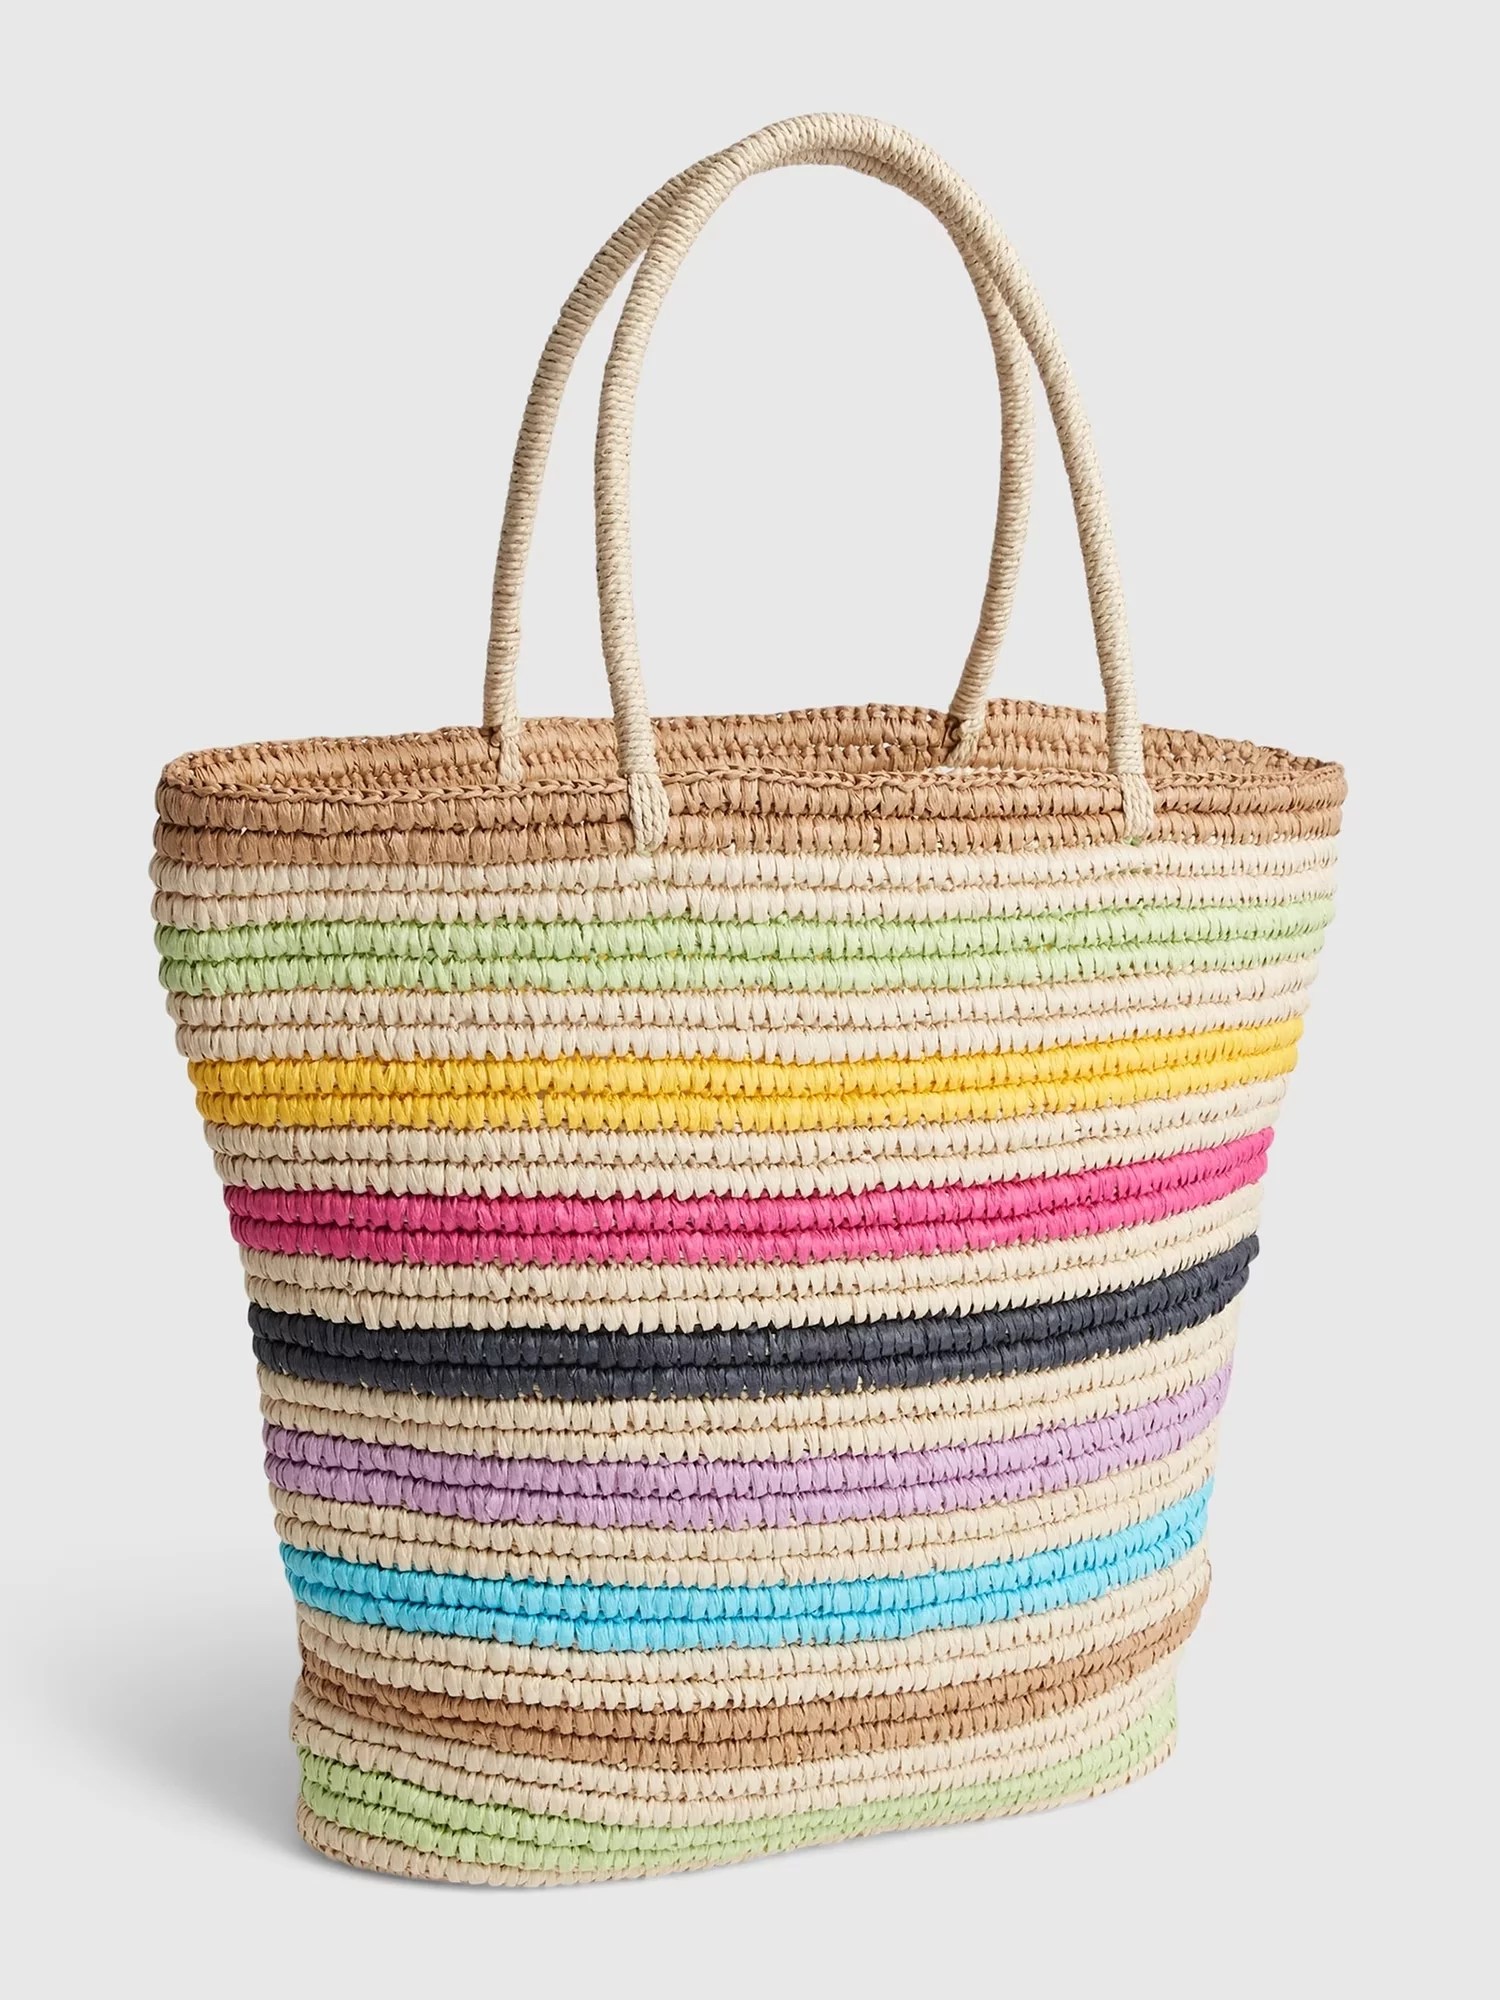 17 Stylish, Most Durable Beach Bags for Summer 2023